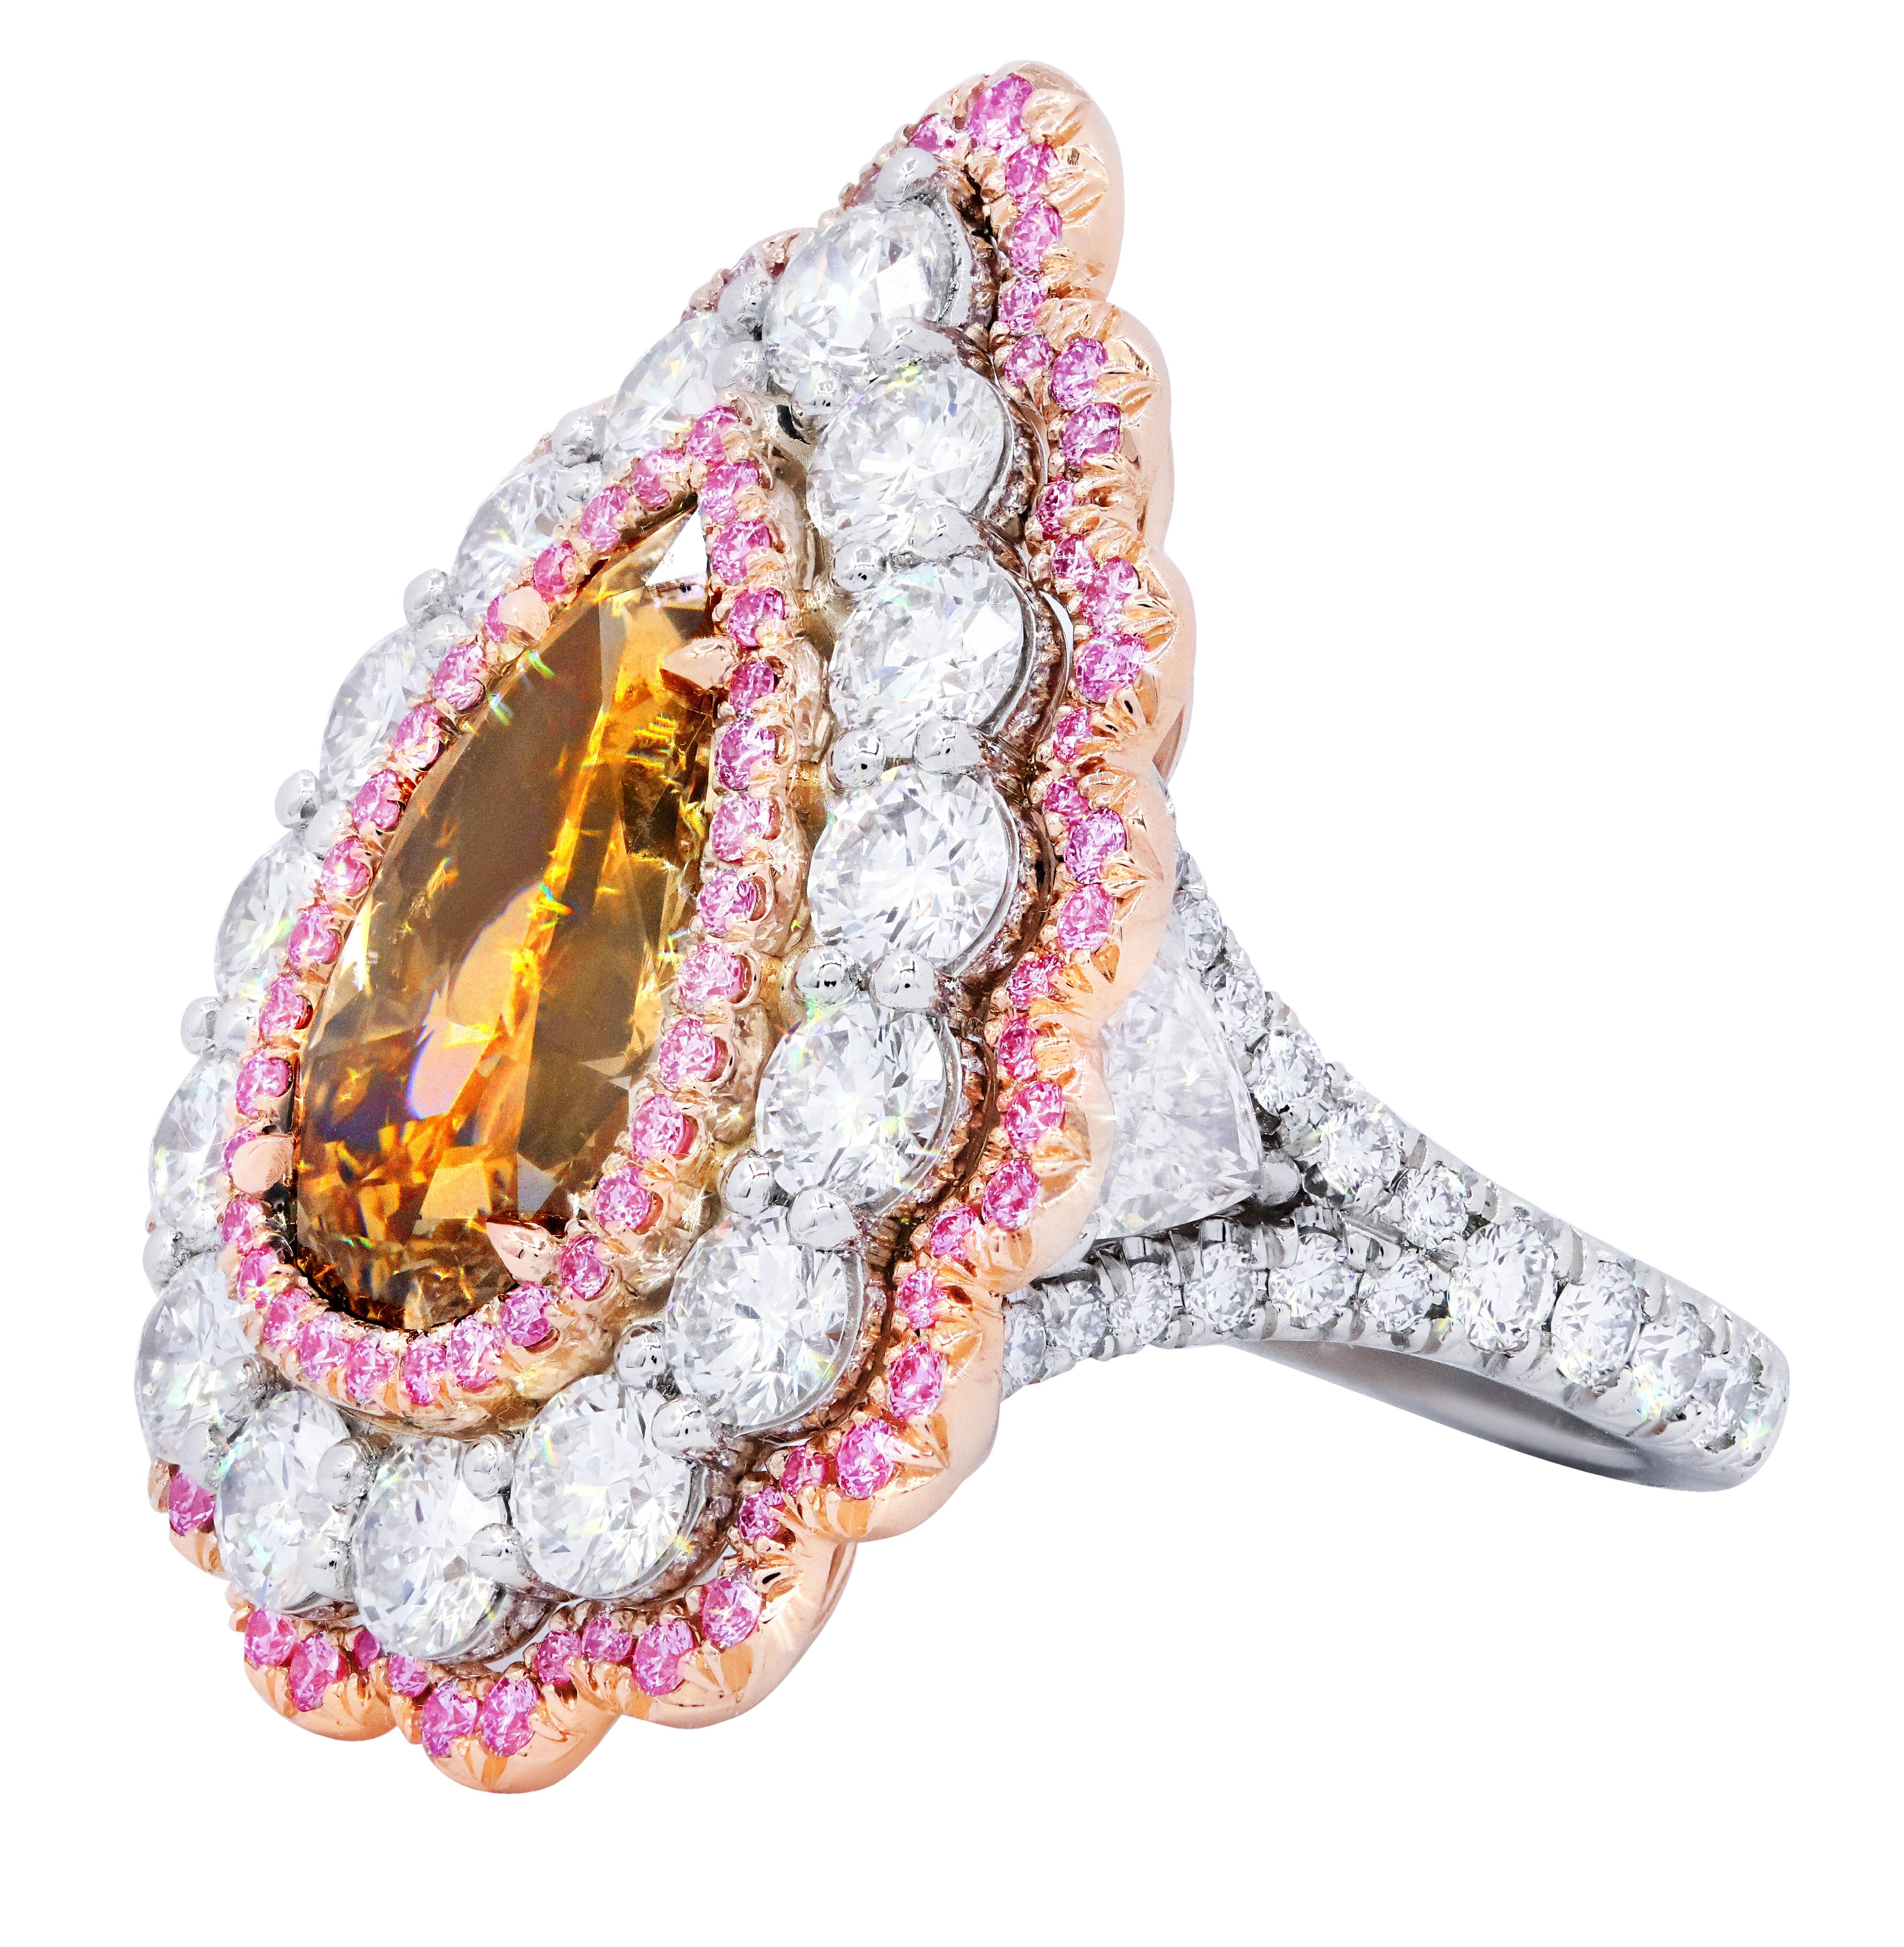 Platinum and 18kt rose gold diamond ring with center fancy brown 5.11ct (psc288) pear shape set in a halo from pink diamonds in micro pave diamond setting with 5.10cts of white big diamonds.
